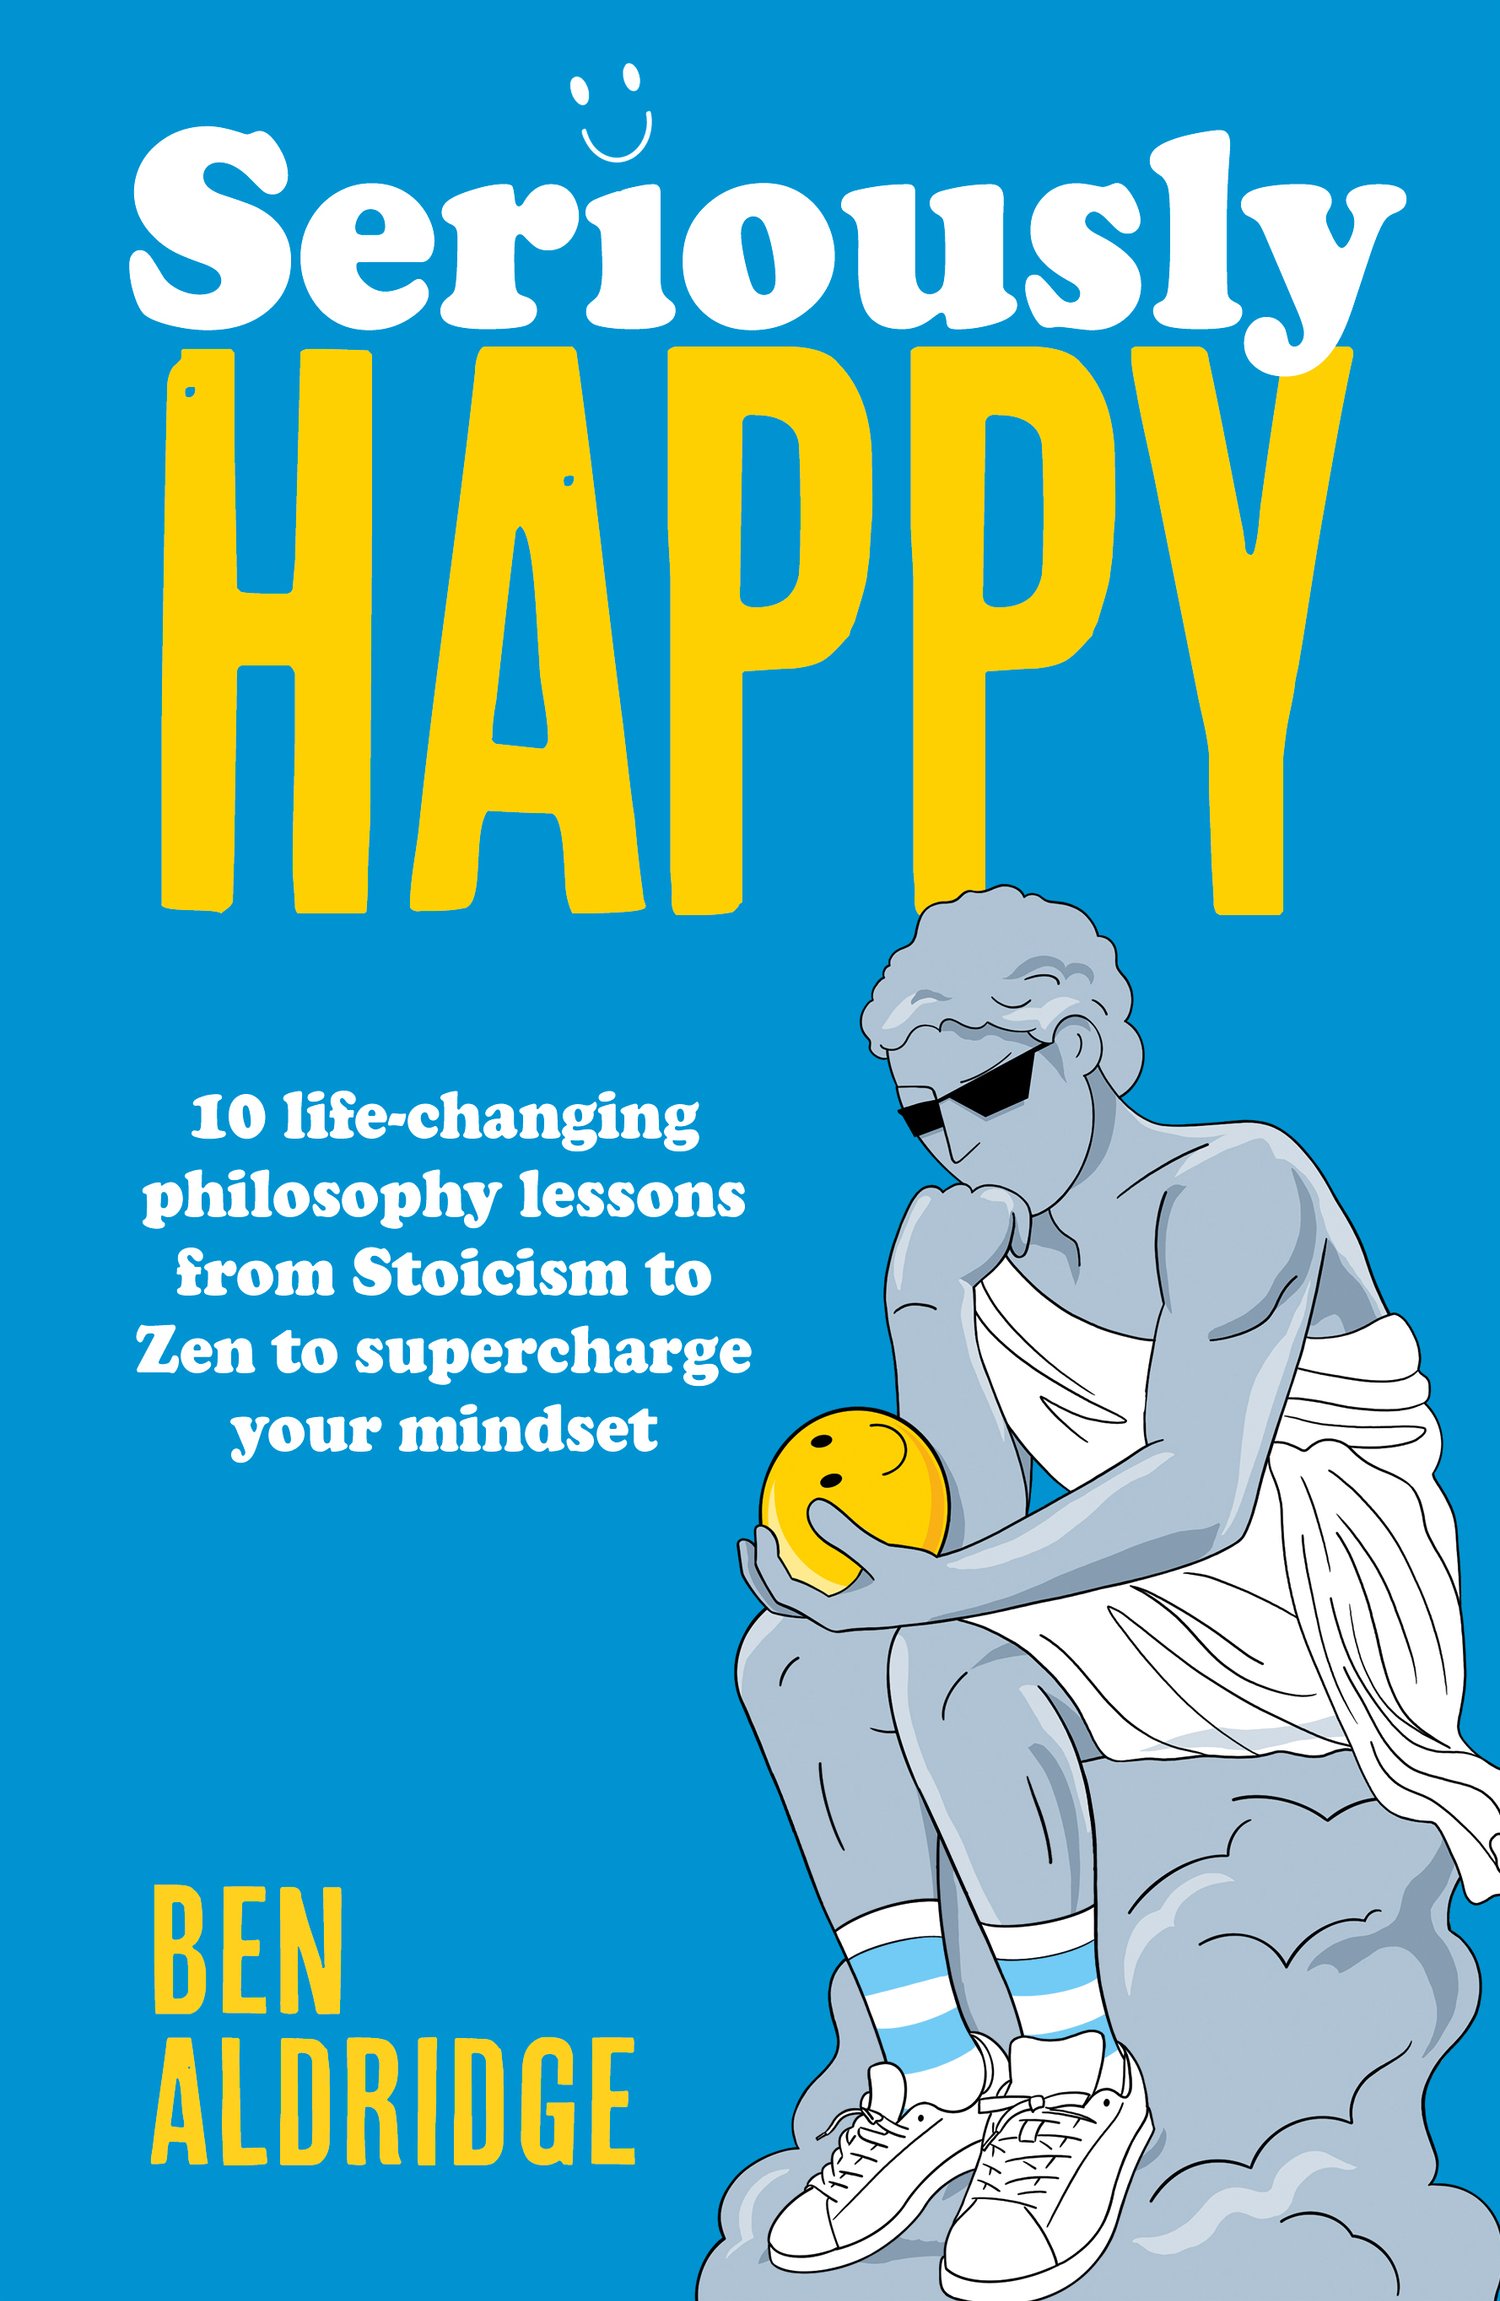 Seriously Happy: 10 Life-Changing Philosophy Lessons from Stoicism to Zen to Supercharge Your Mindset